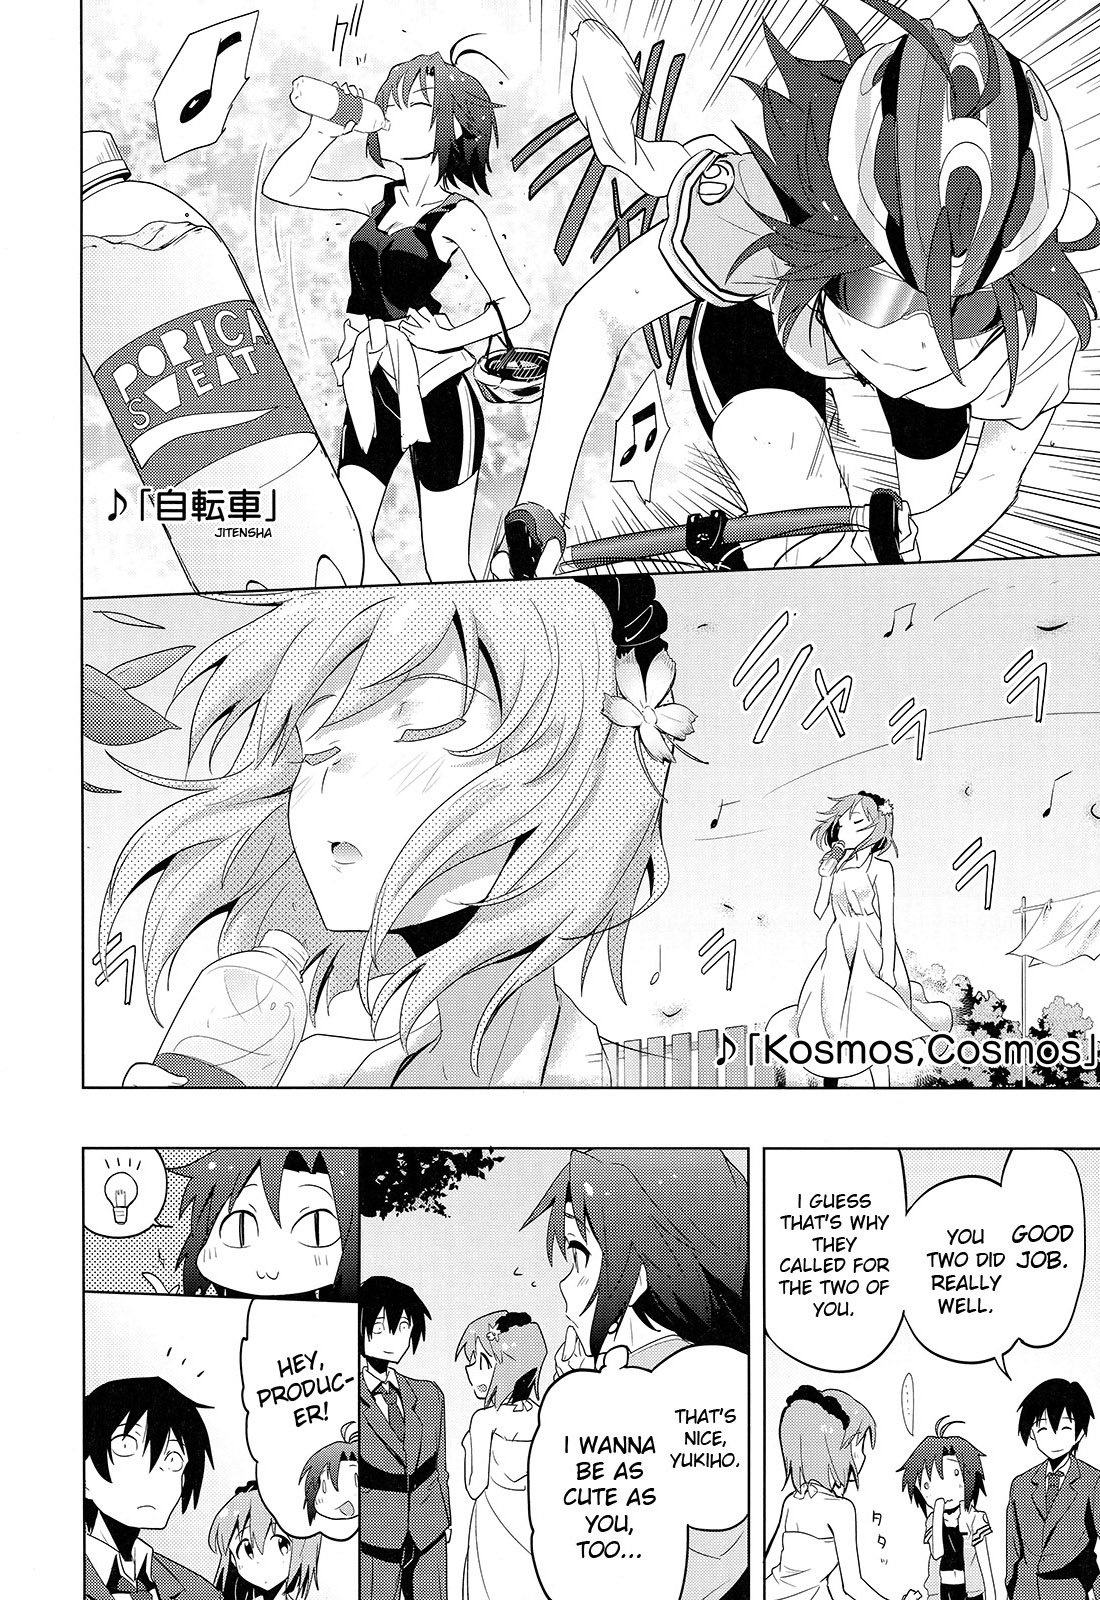 THE iDOLM@STER 2 The world is all one!! Vol. 2 Ch. 16 Budding Motivation, Growing Branches